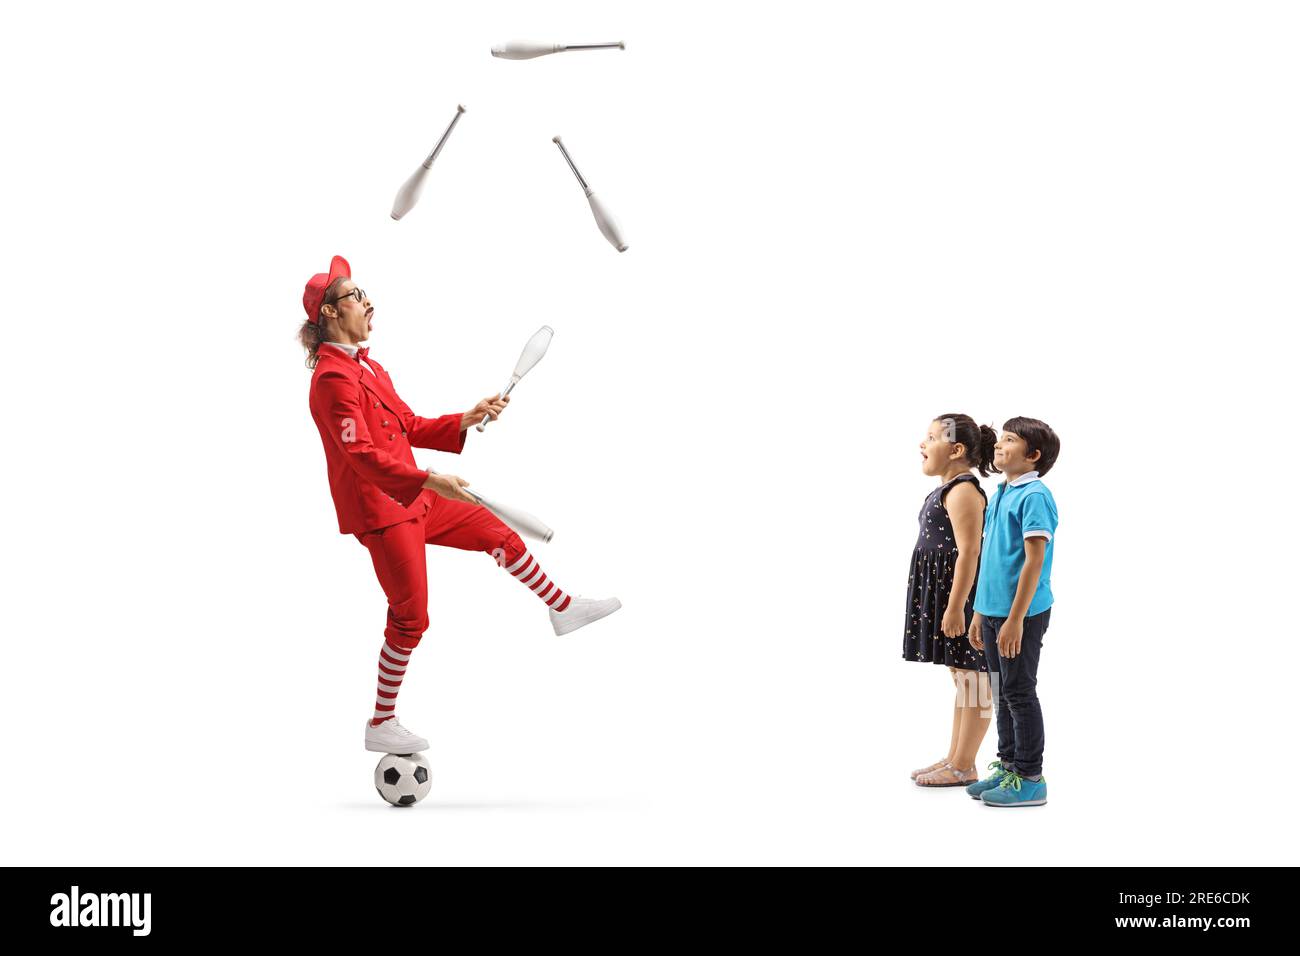 Kids watching a man in a red suit standing on a football and juggling isolated on white background Stock Photo